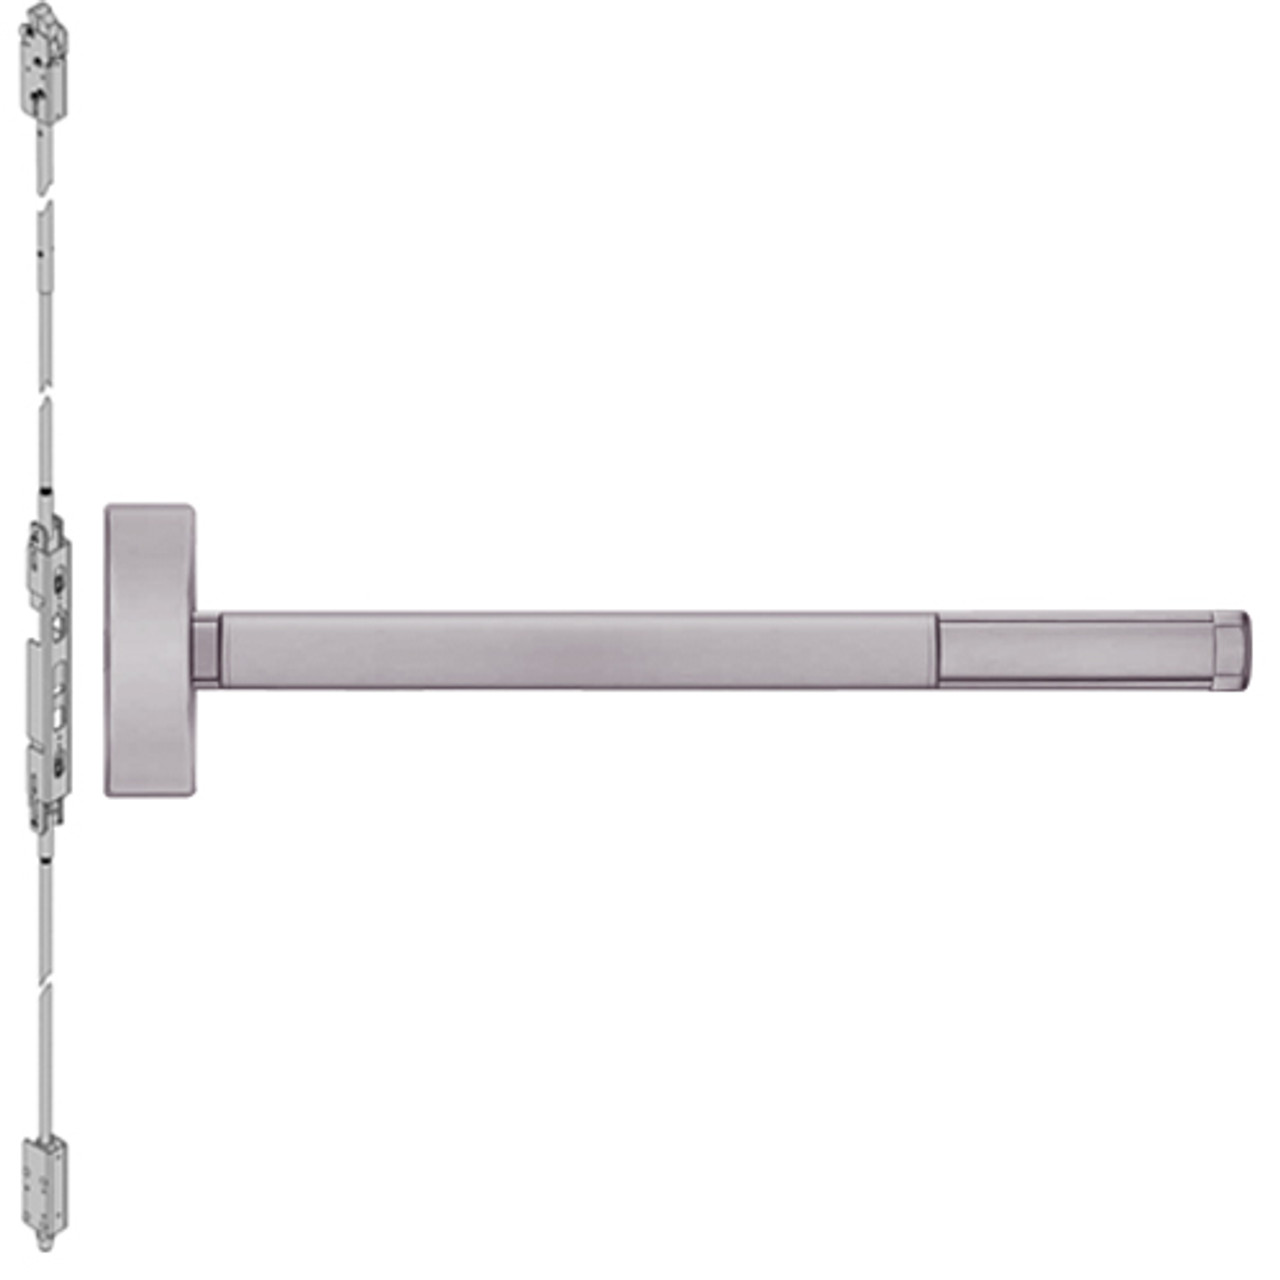 FL2803-630-48 PHI 2800 Series Fire Rated Concealed Vertical Rod Exit Device Prepped for Key Retracts Latchbolt in Satin Stainless Steel Finish